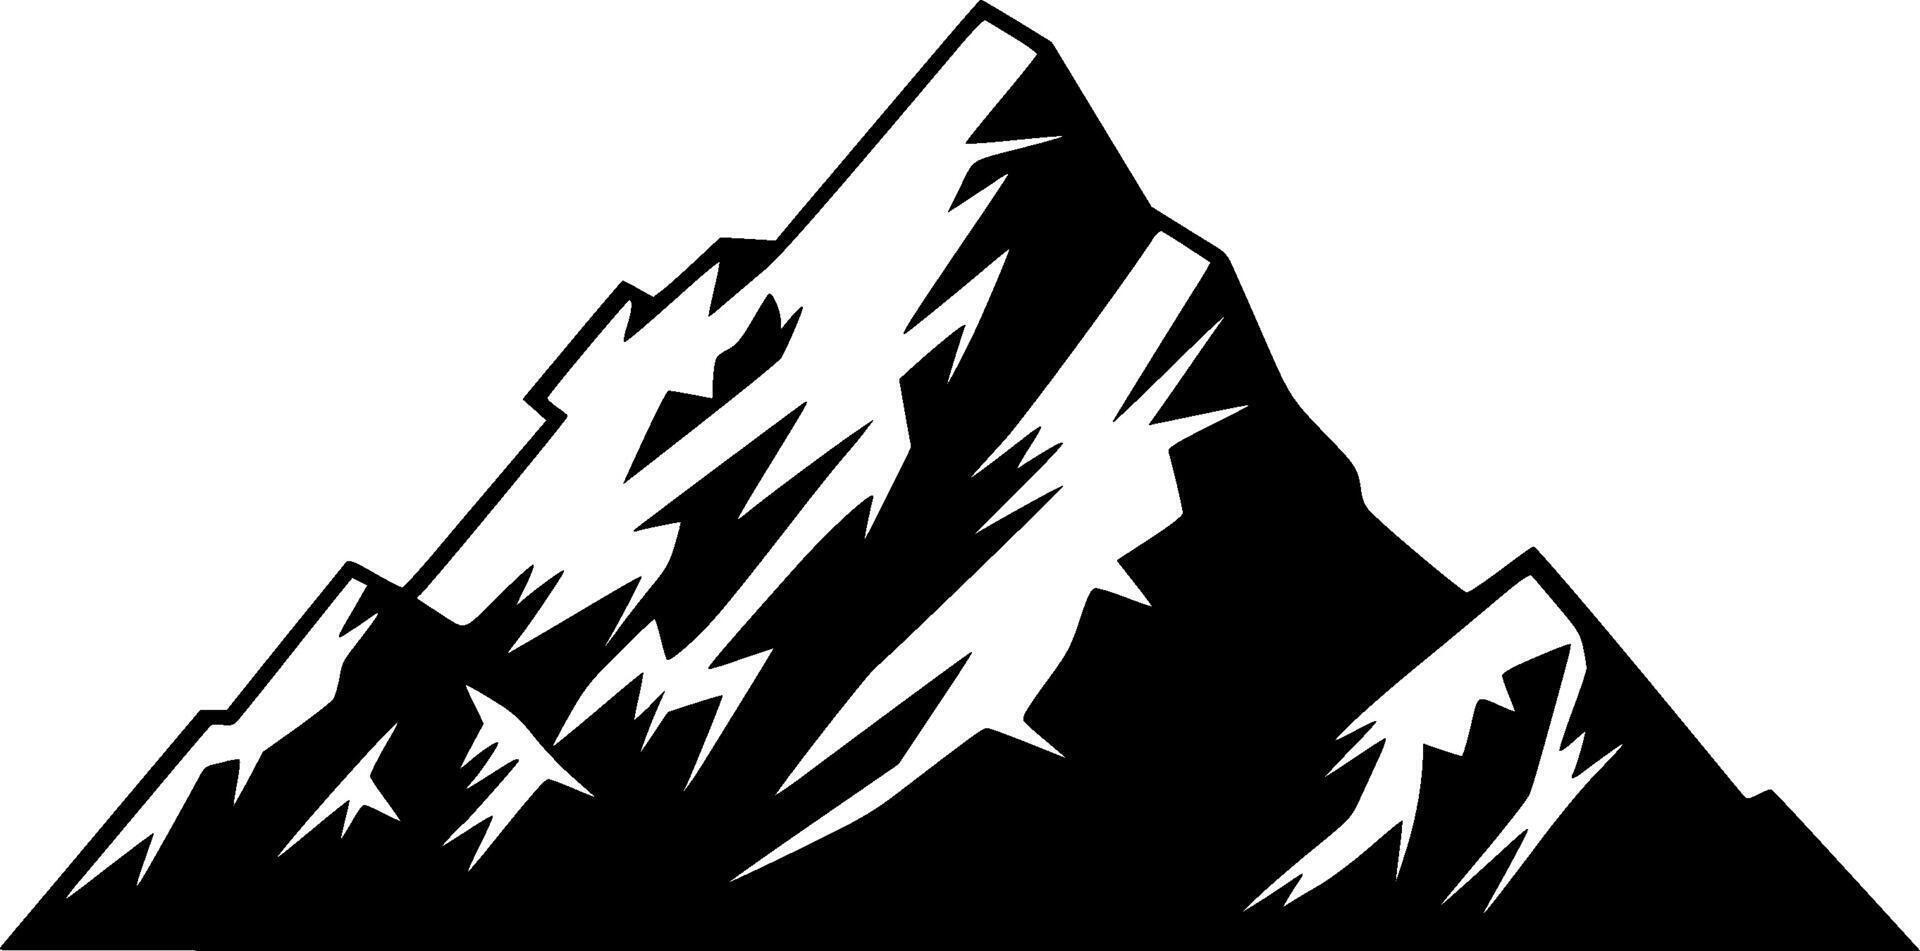 Mountain, Black and White illustration vector